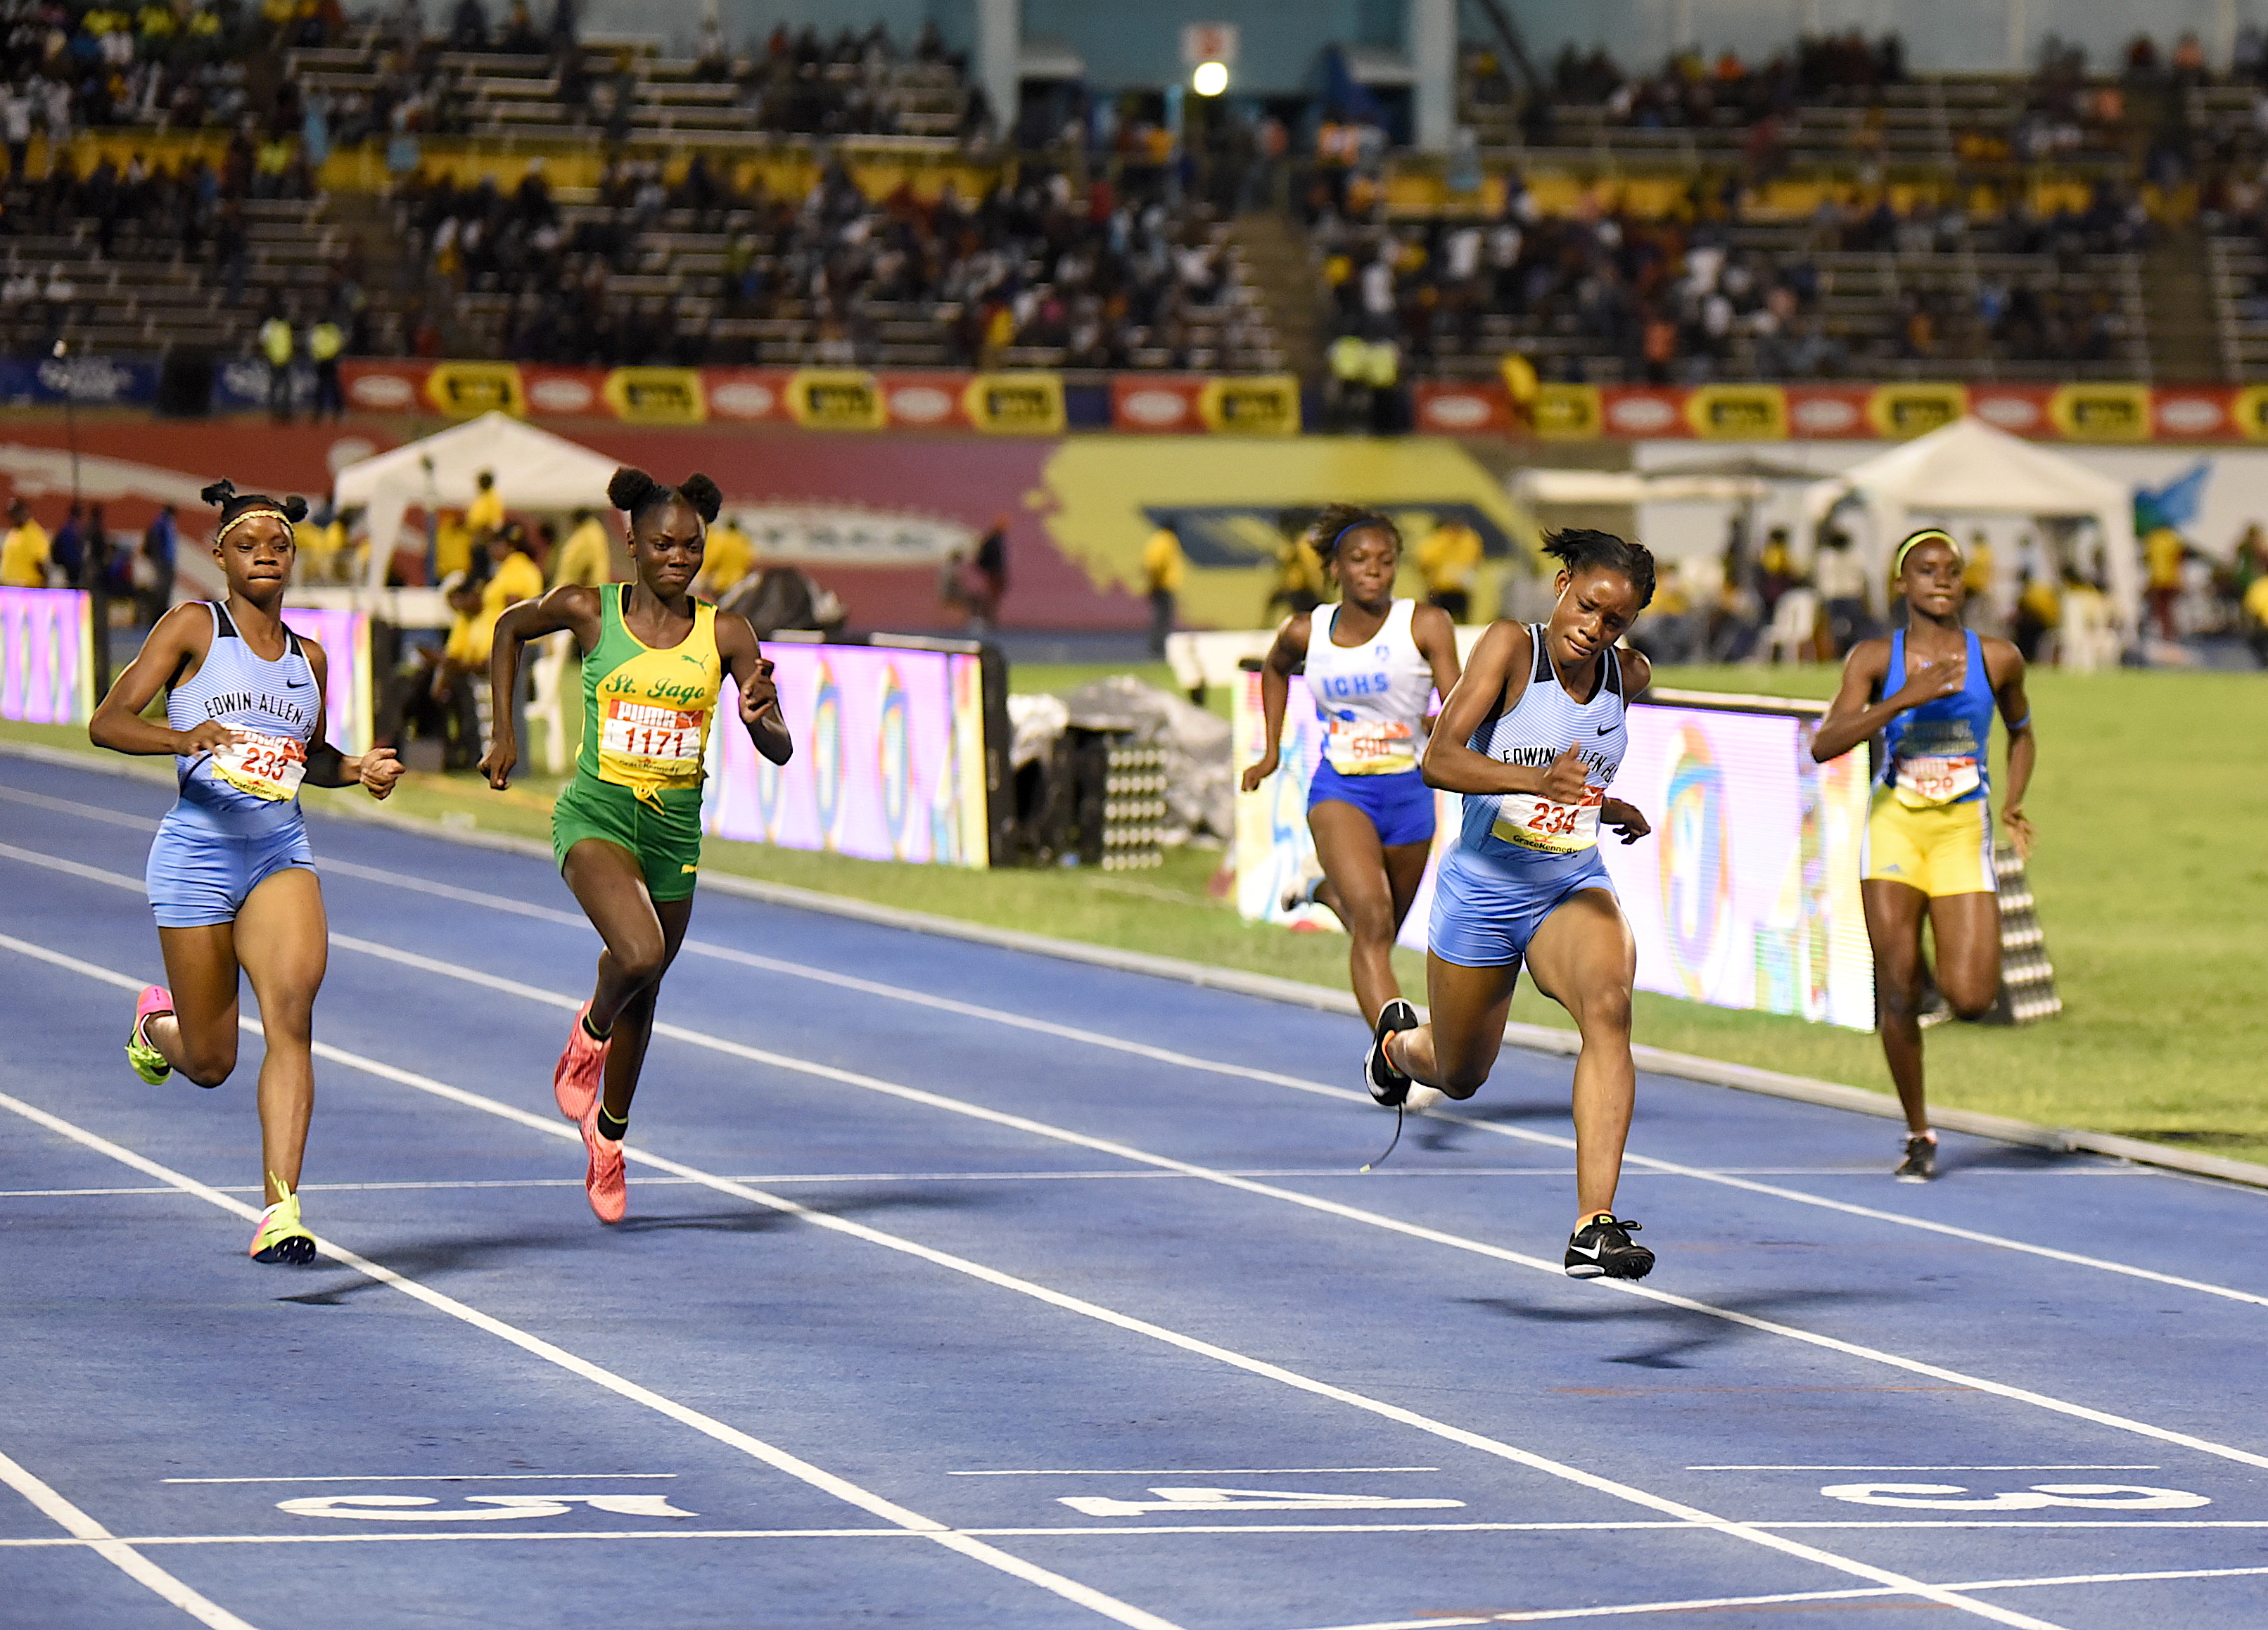 Nine meets proposed to open track and field season on February 13